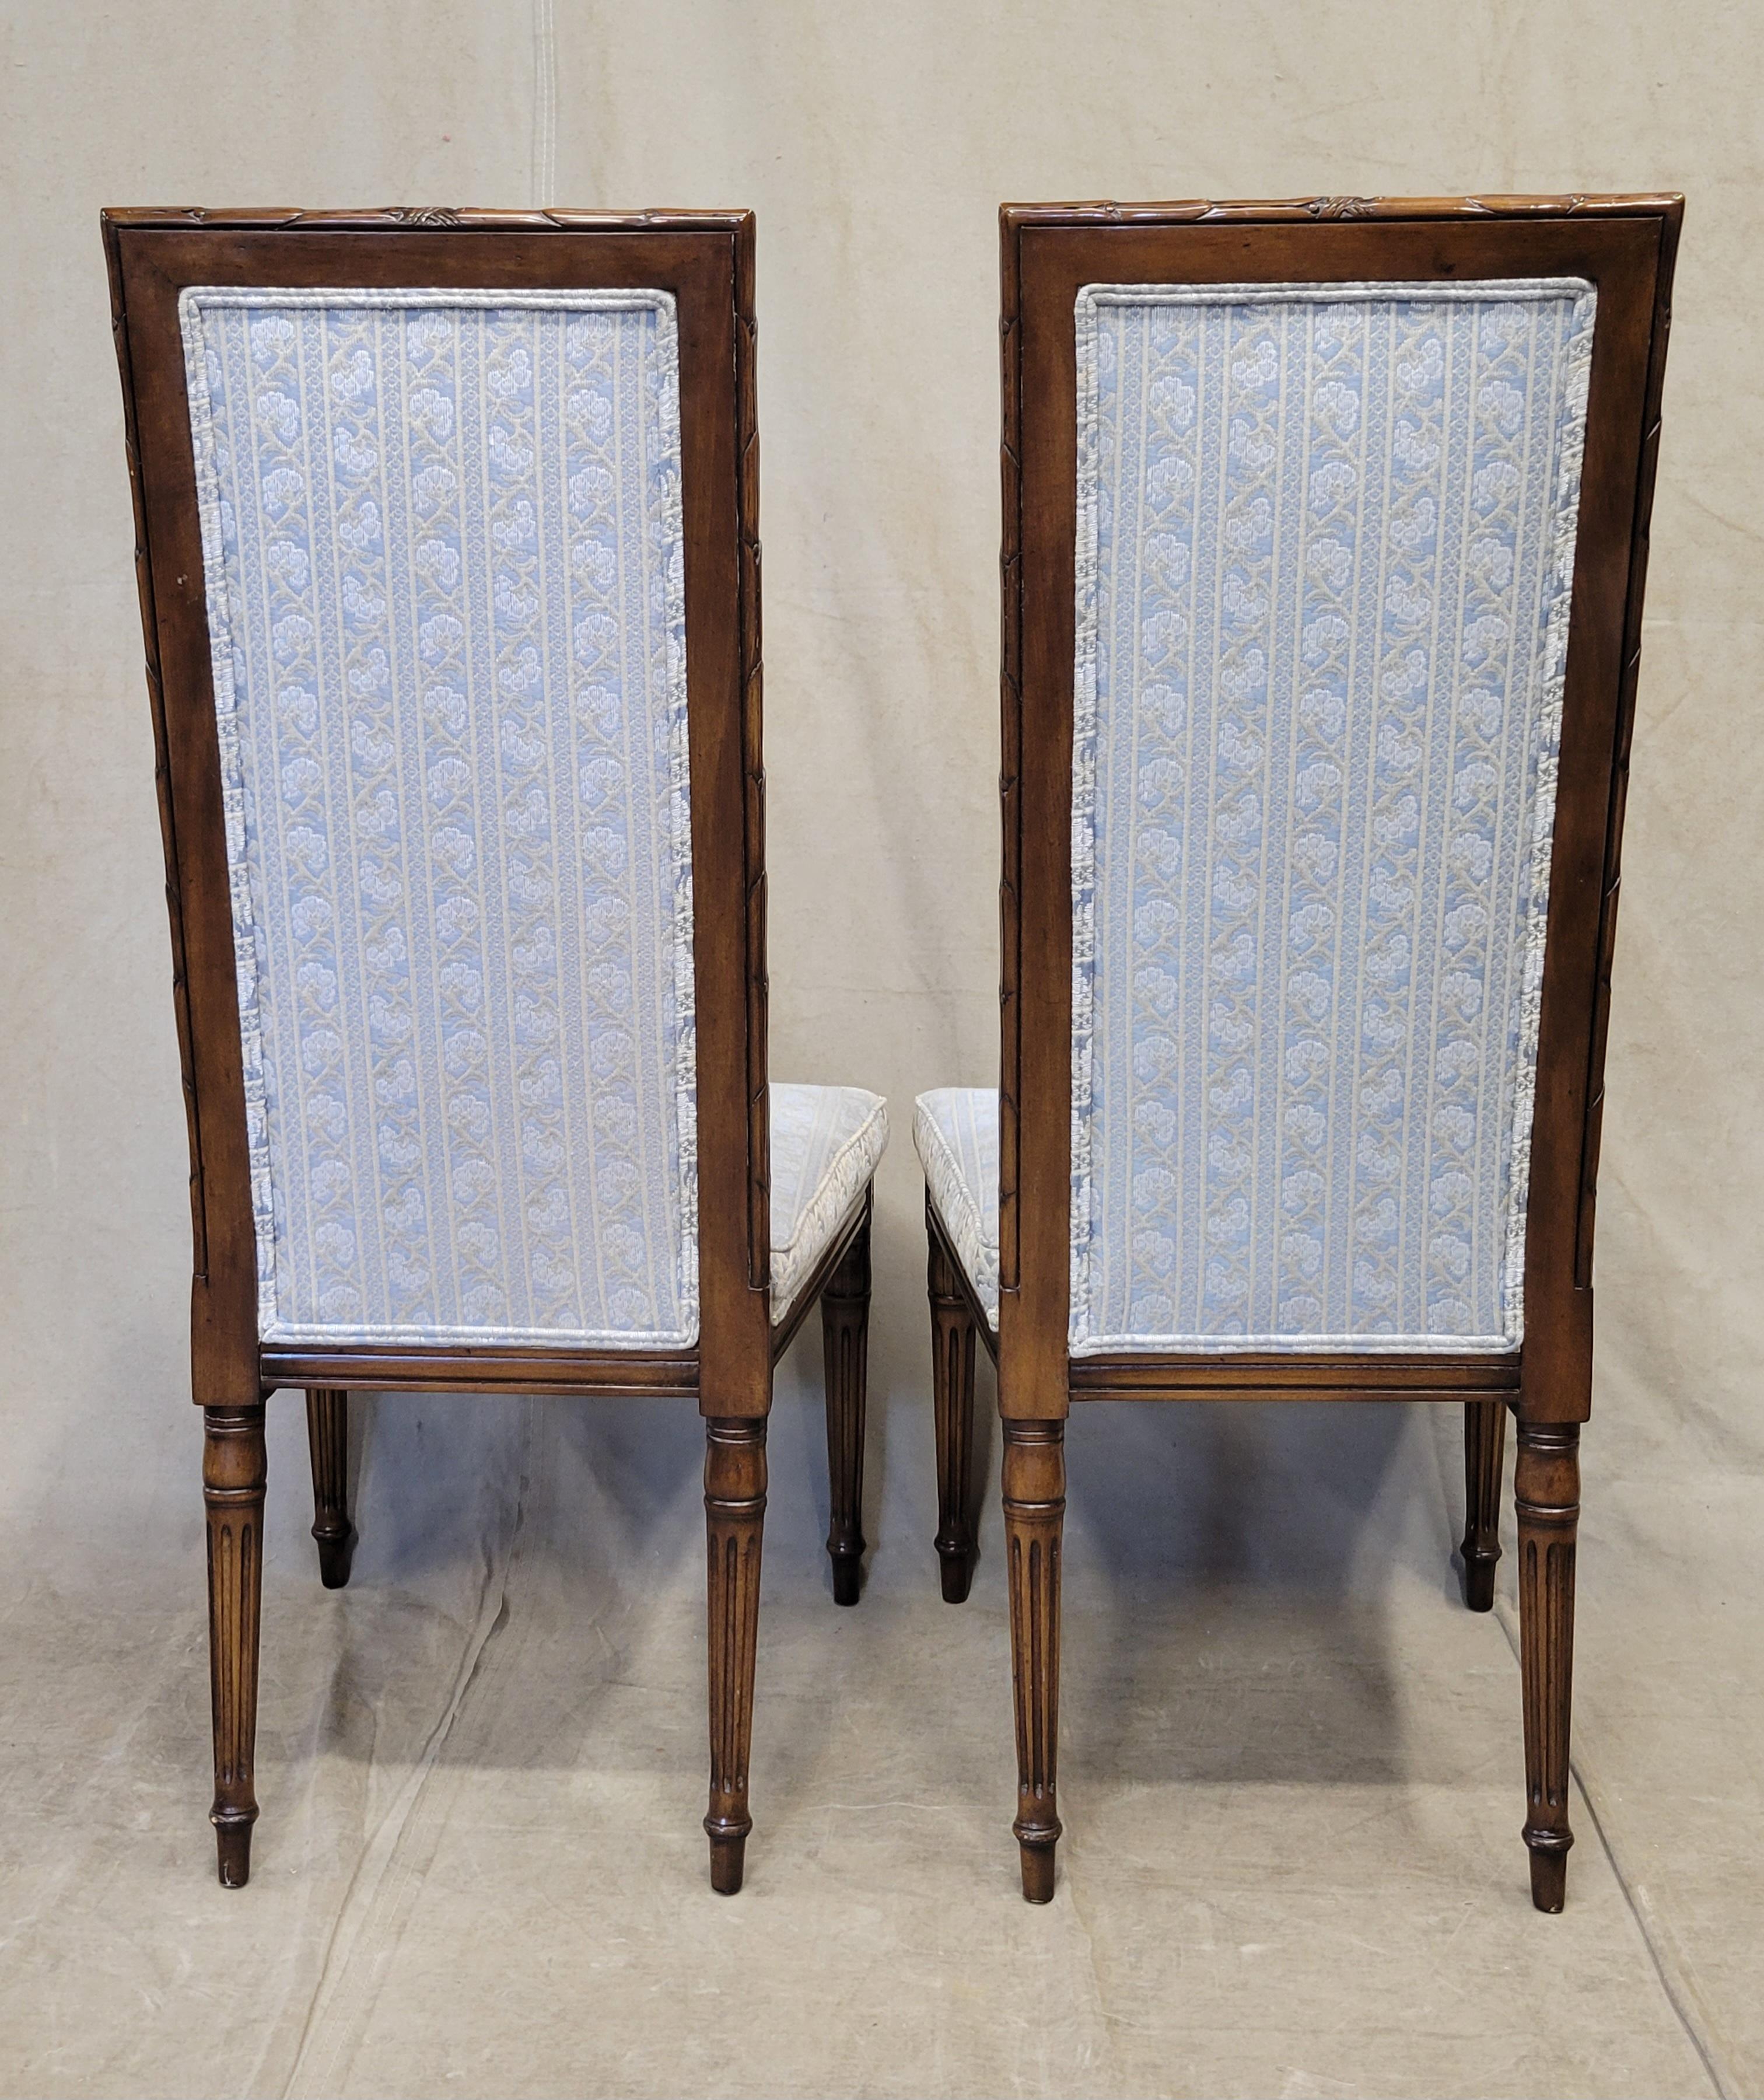 Vintage Karges Neoclassical Dining Chairs With Pale Blue Upholstery - Set of 8 4